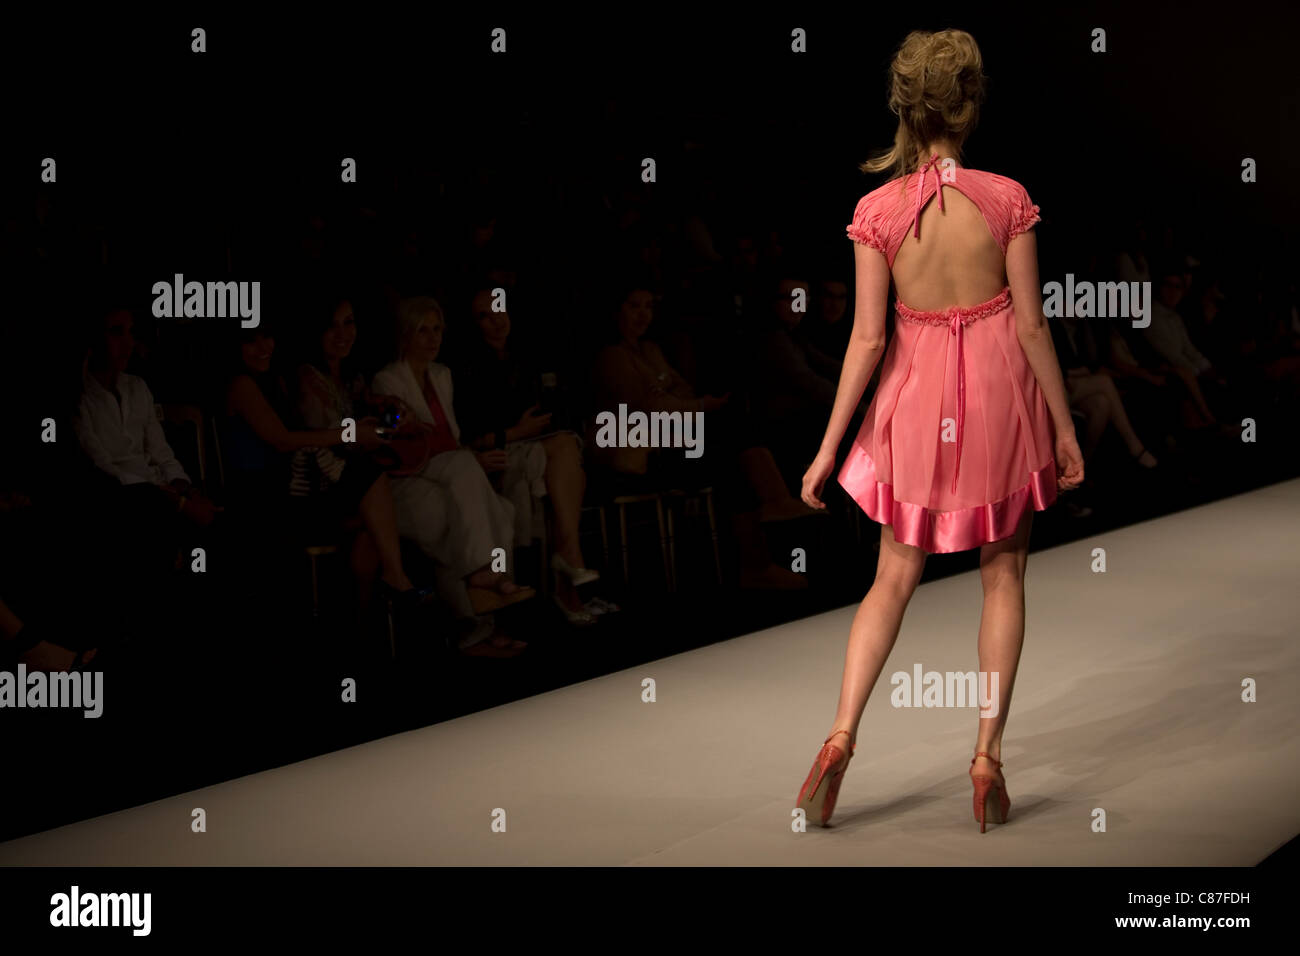 A model wearing a desing by Jannette Klein university students walks along the catwalk during Mexico City Fashion Week 2011 Stock Photo